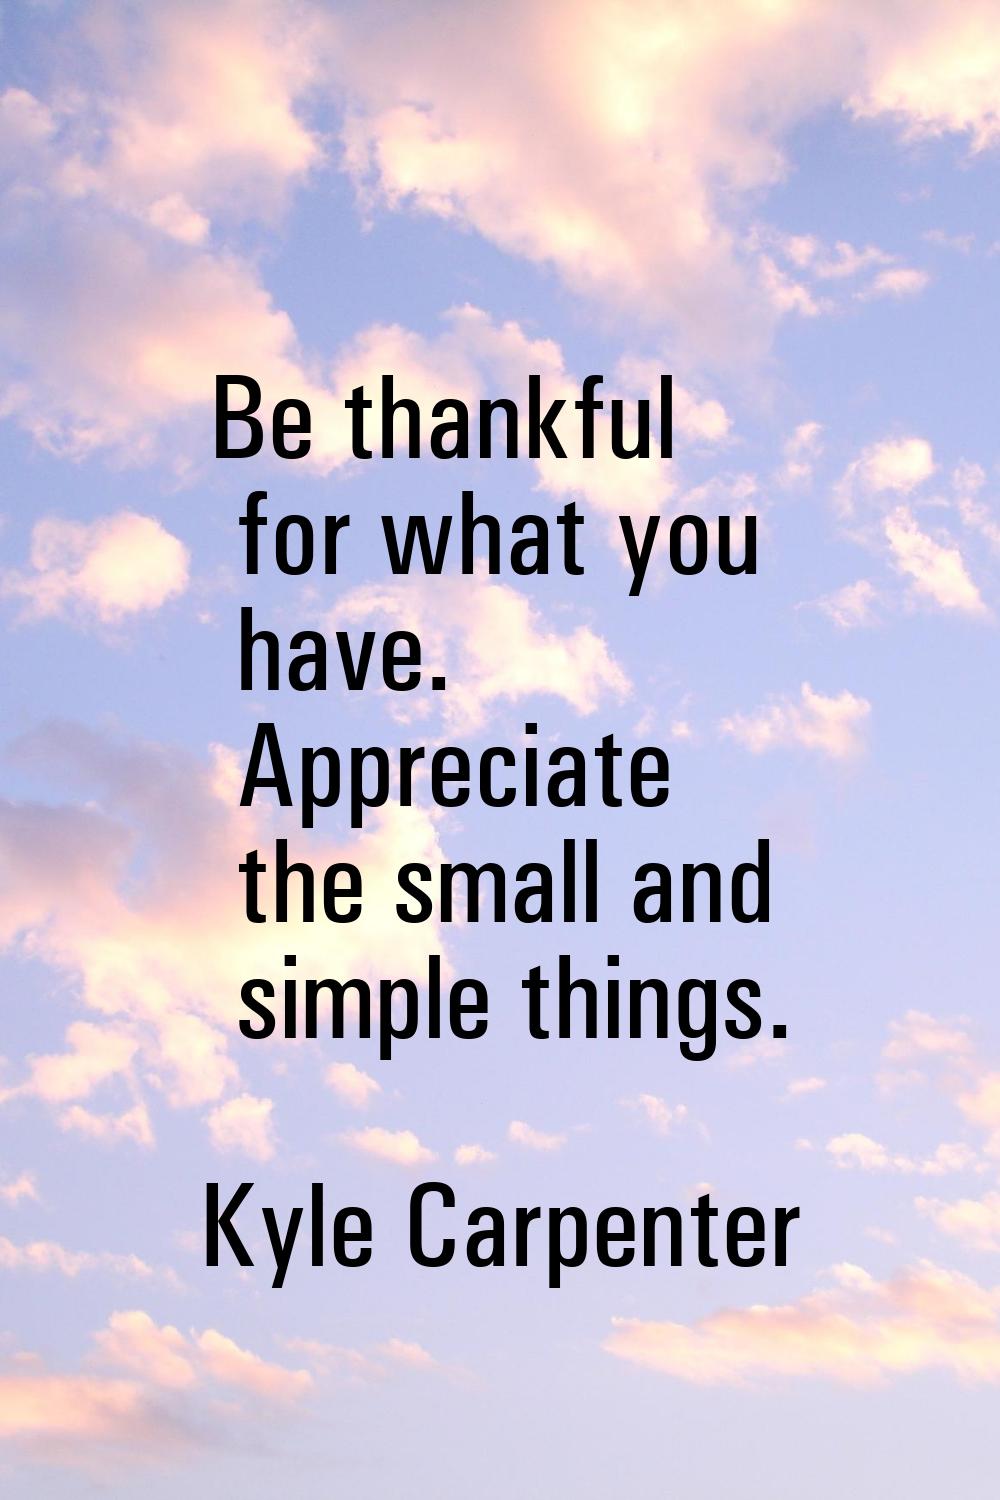 Be thankful for what you have. Appreciate the small and simple things.